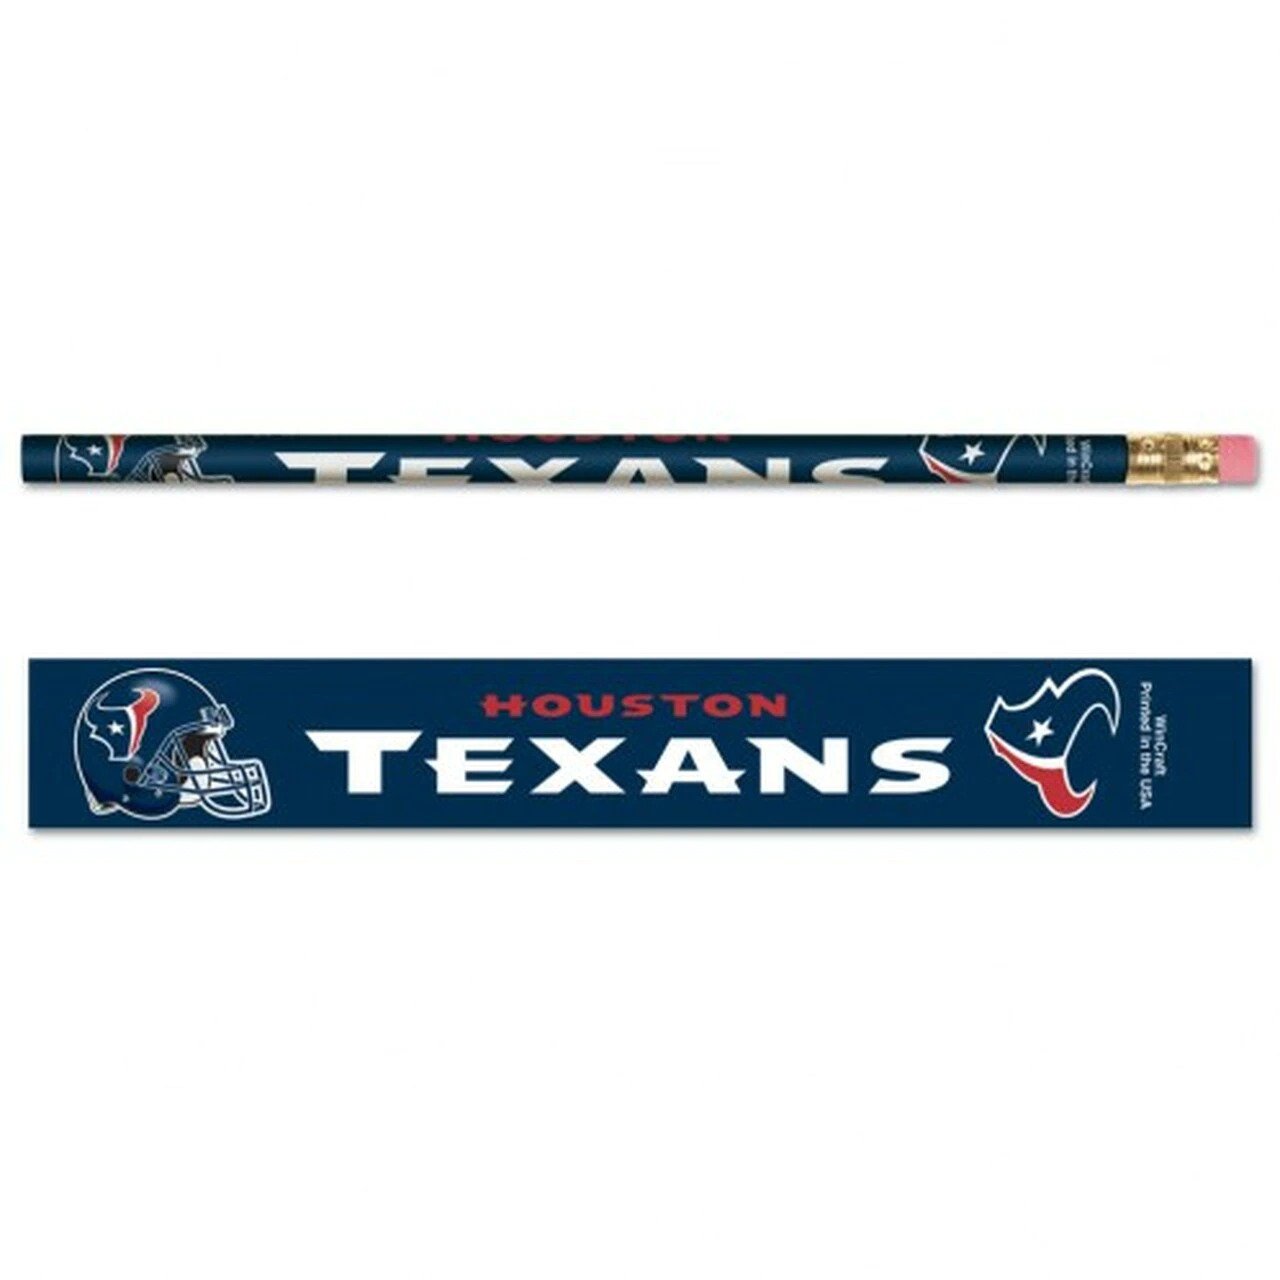 Houston Texans 2 Packs of Pencils - 6 per pack by Wincraft